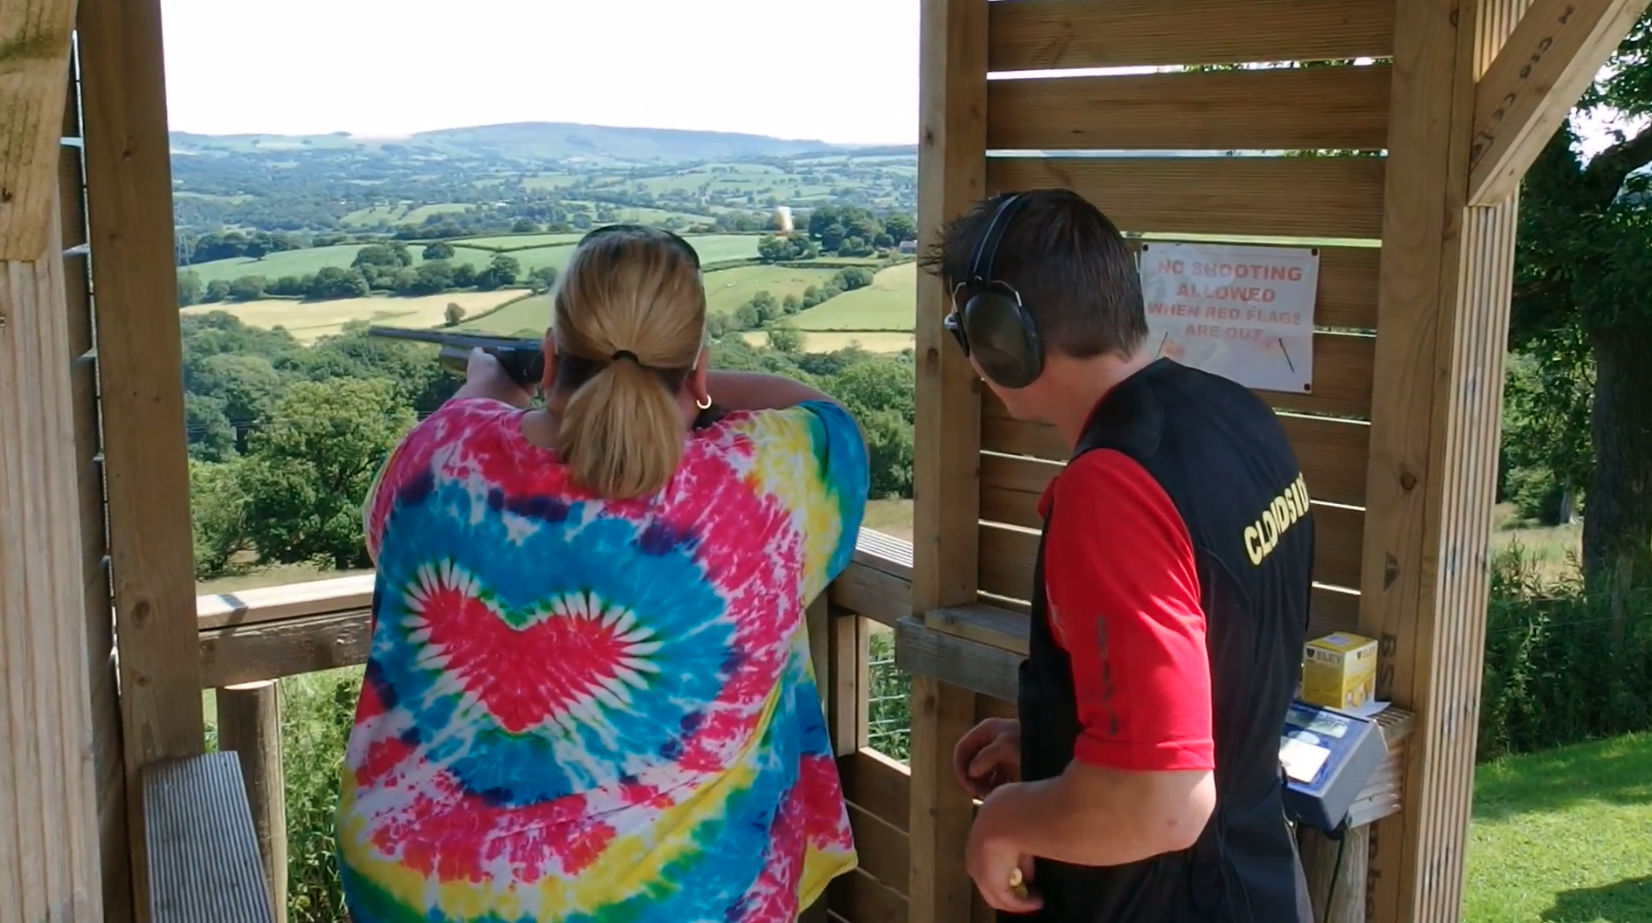 Clay Pigeon Shooting at Cloudside Sporting Club